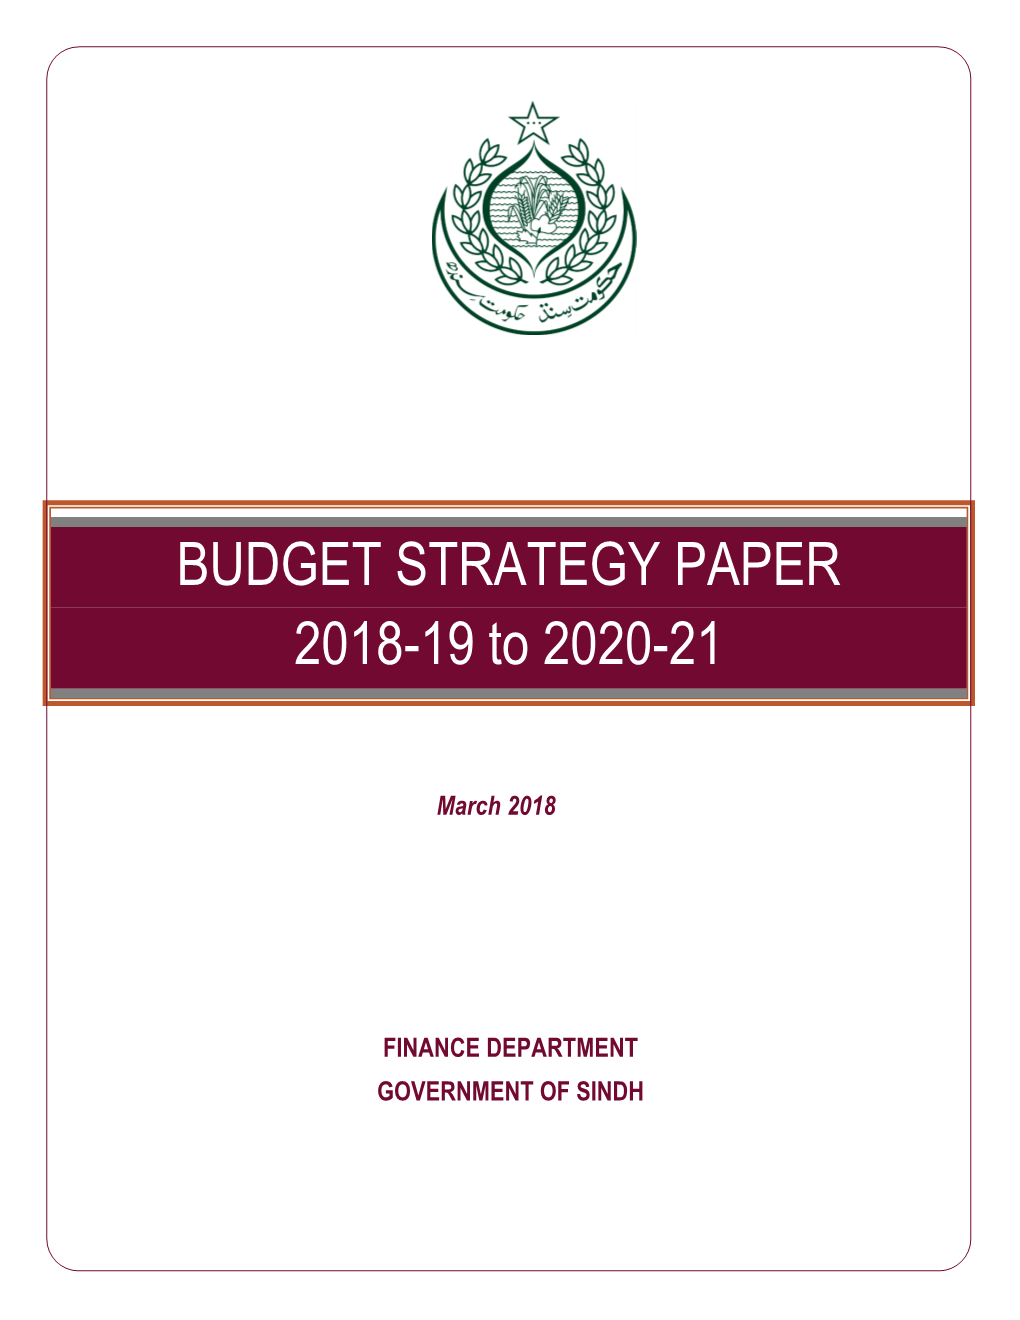 BUDGET STRATEGY PAPER 2018-19 to 2020-21